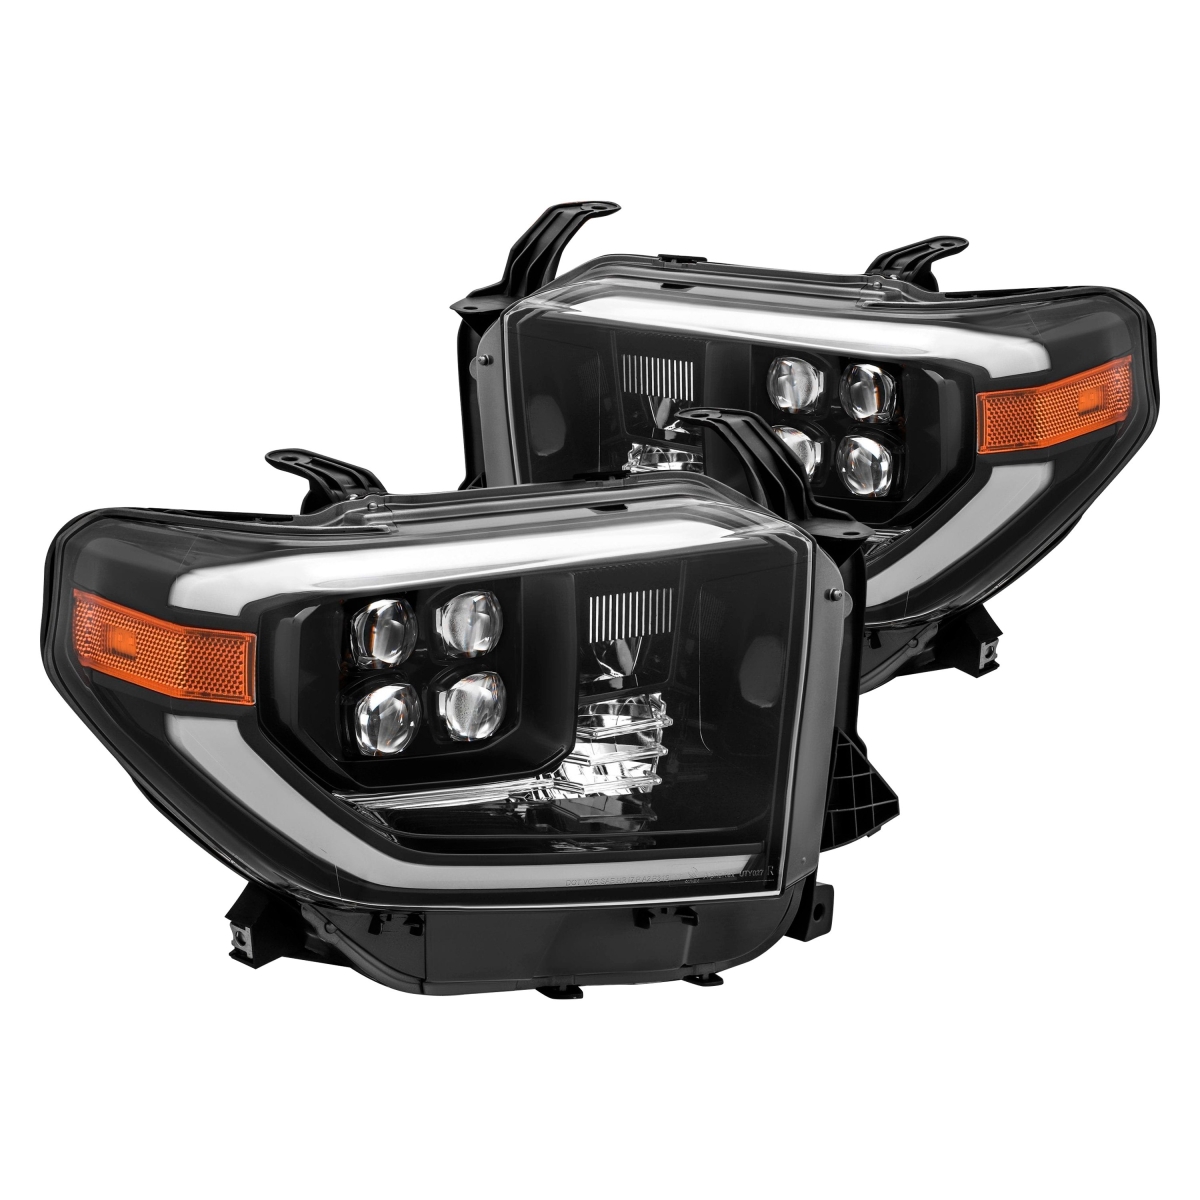 Picture of Alpharex USA ALR880728 20 Series LED Projector Headlights for 2014-2020 Toyota Tundra